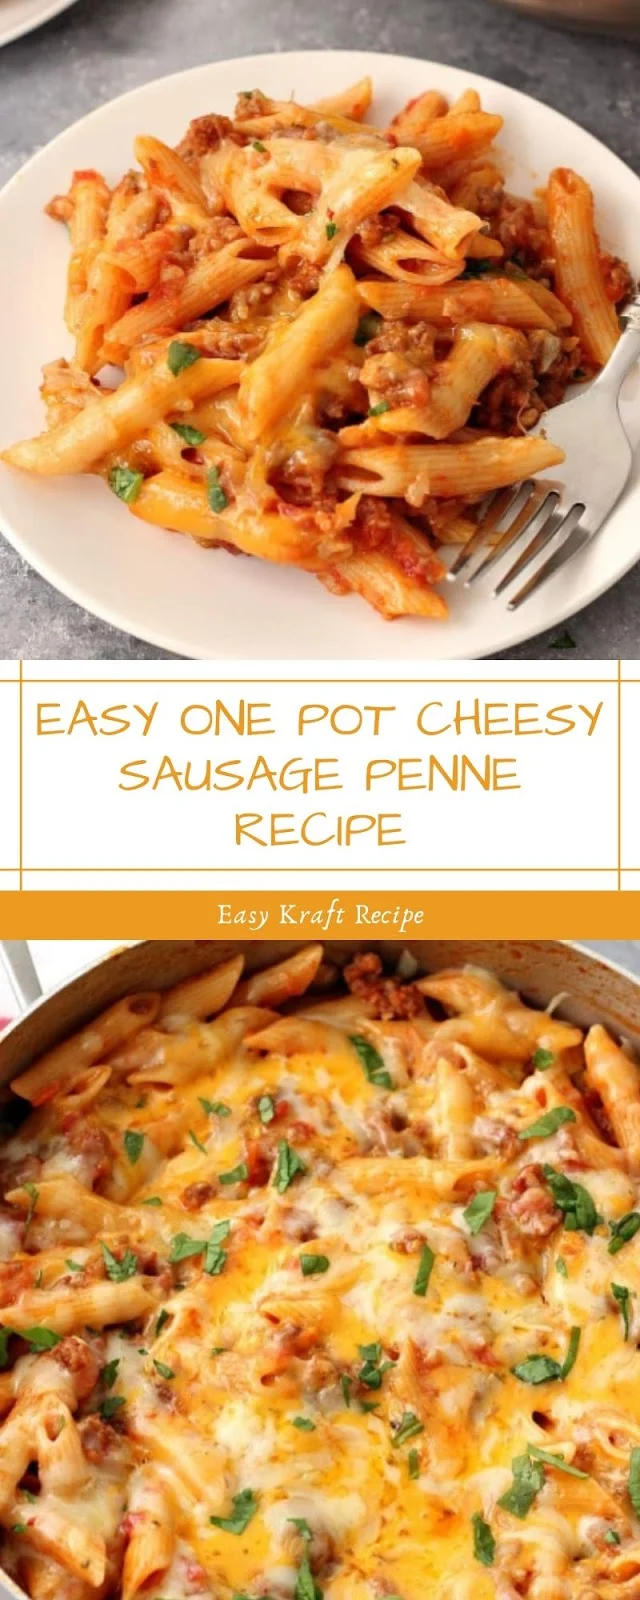 EASY ONE POT CHEESY SAUSAGE PENNE RECIPE